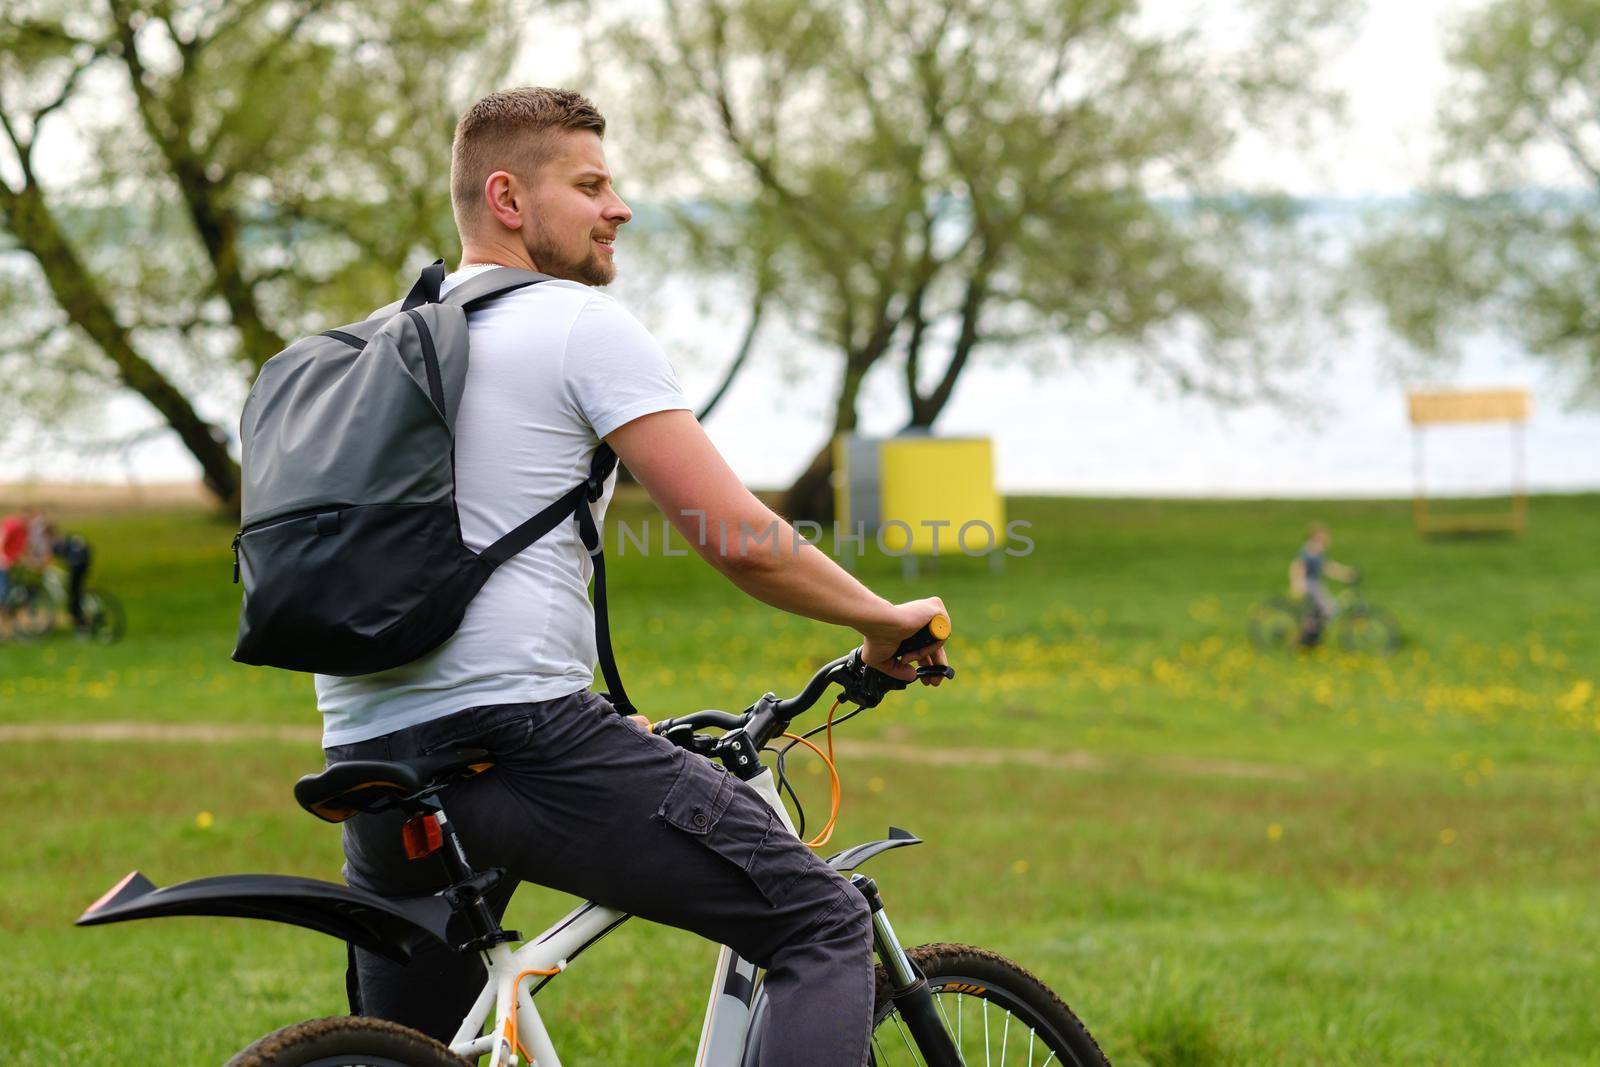 A cyclist with a backpack is standing on a bicycle in a clearing enjoying nature.